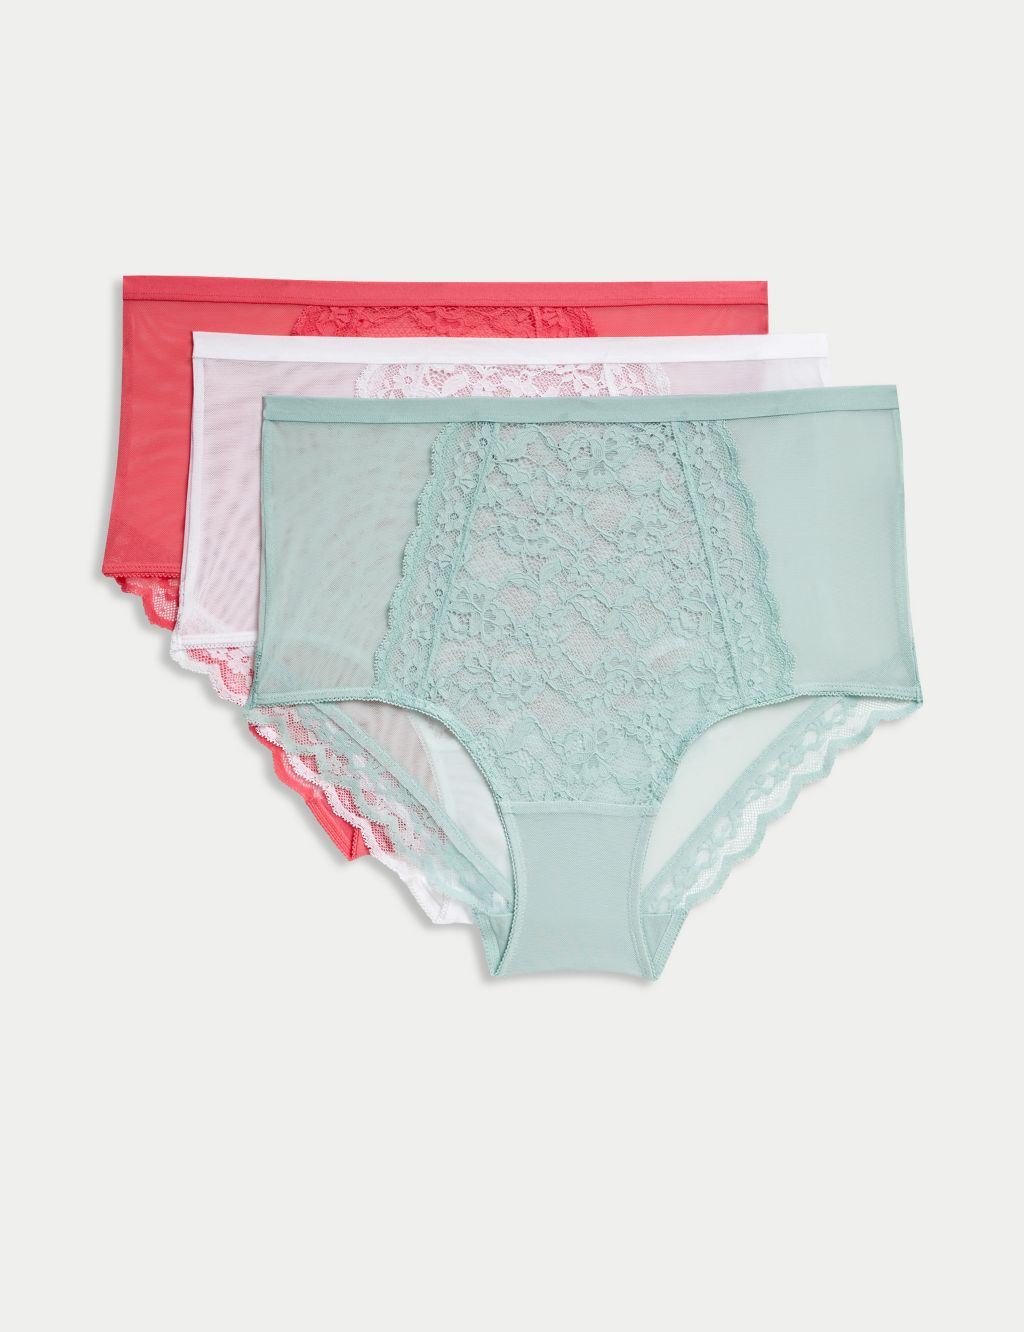 Matalan Floral Lace Briefs Knickers Size 8 14 Stretch Bow Underwear Peach